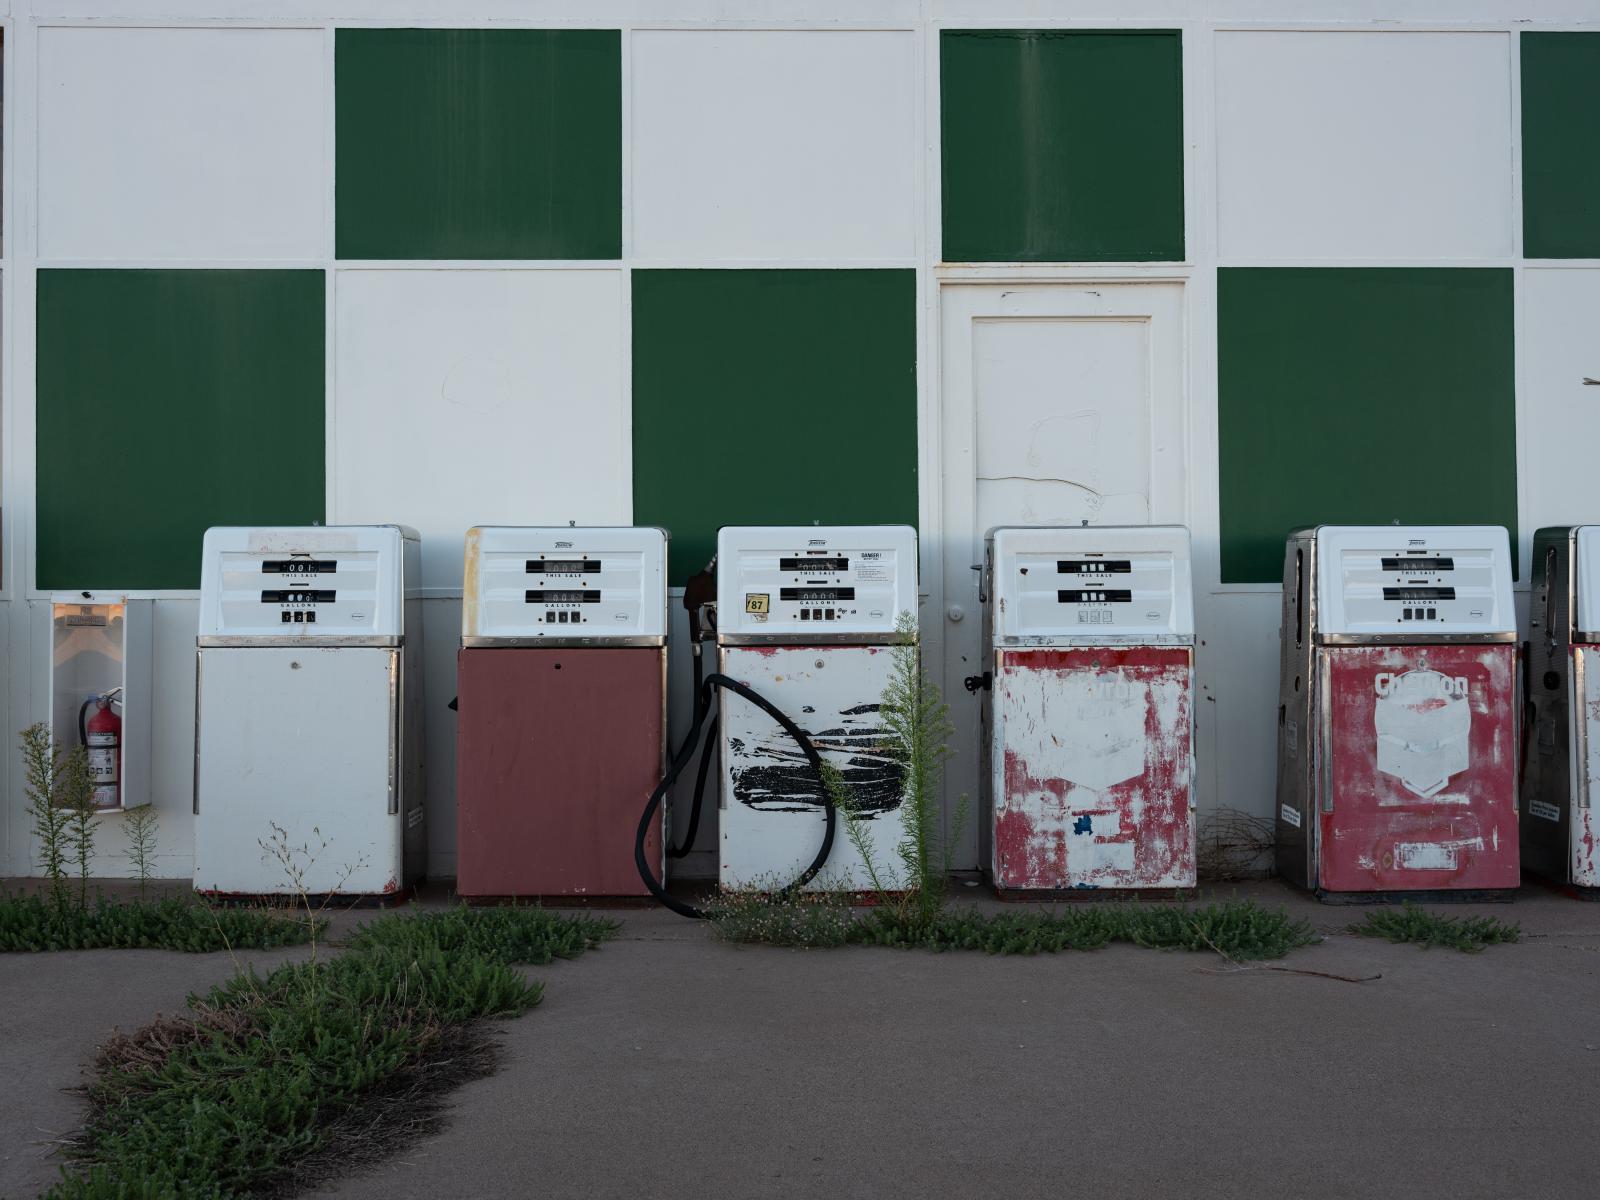 Gas Station, Grand Canyon Caverns Inn | Buy this image